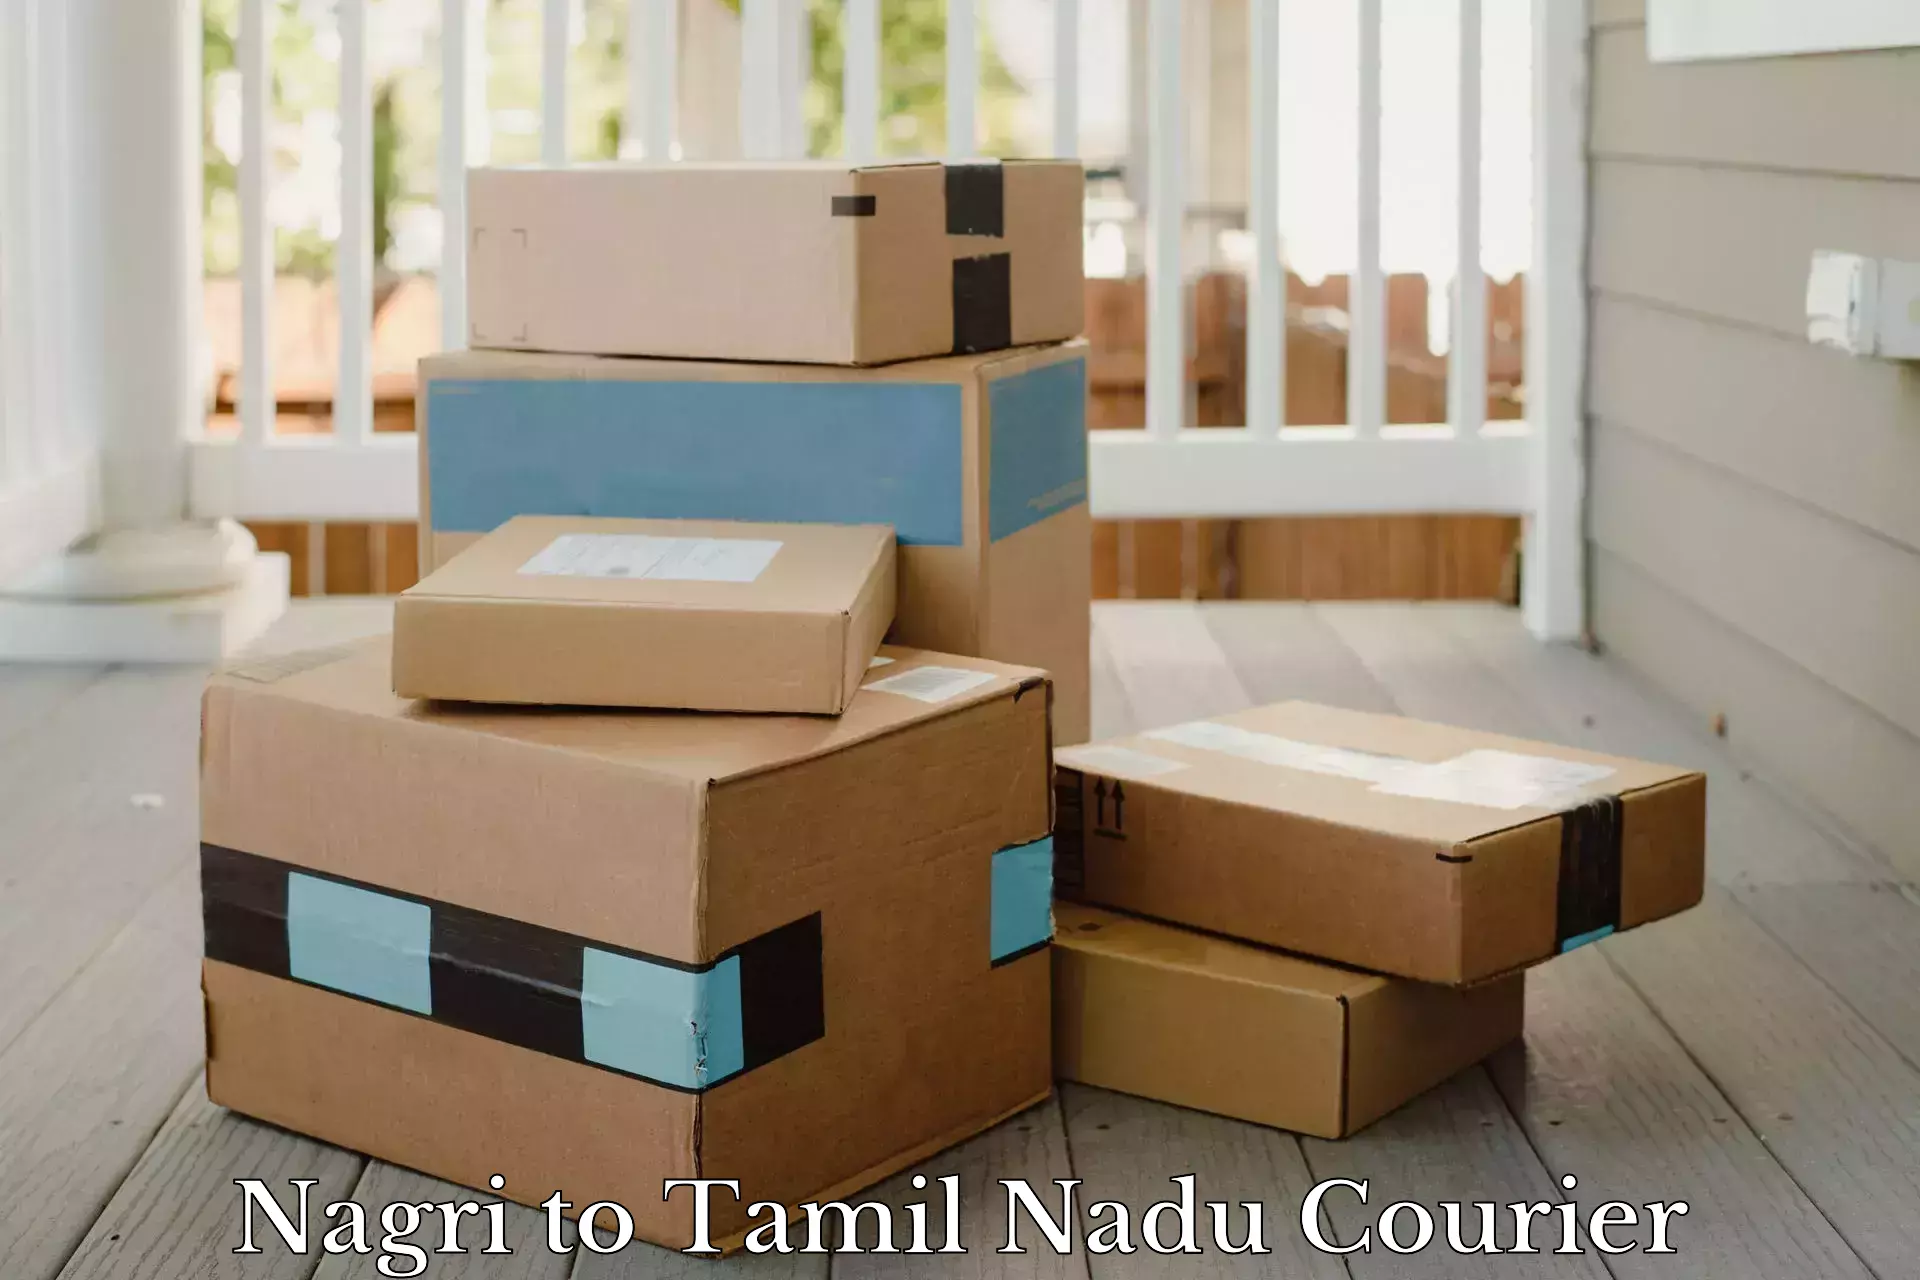 Flexible delivery schedules Nagri to Ambattur